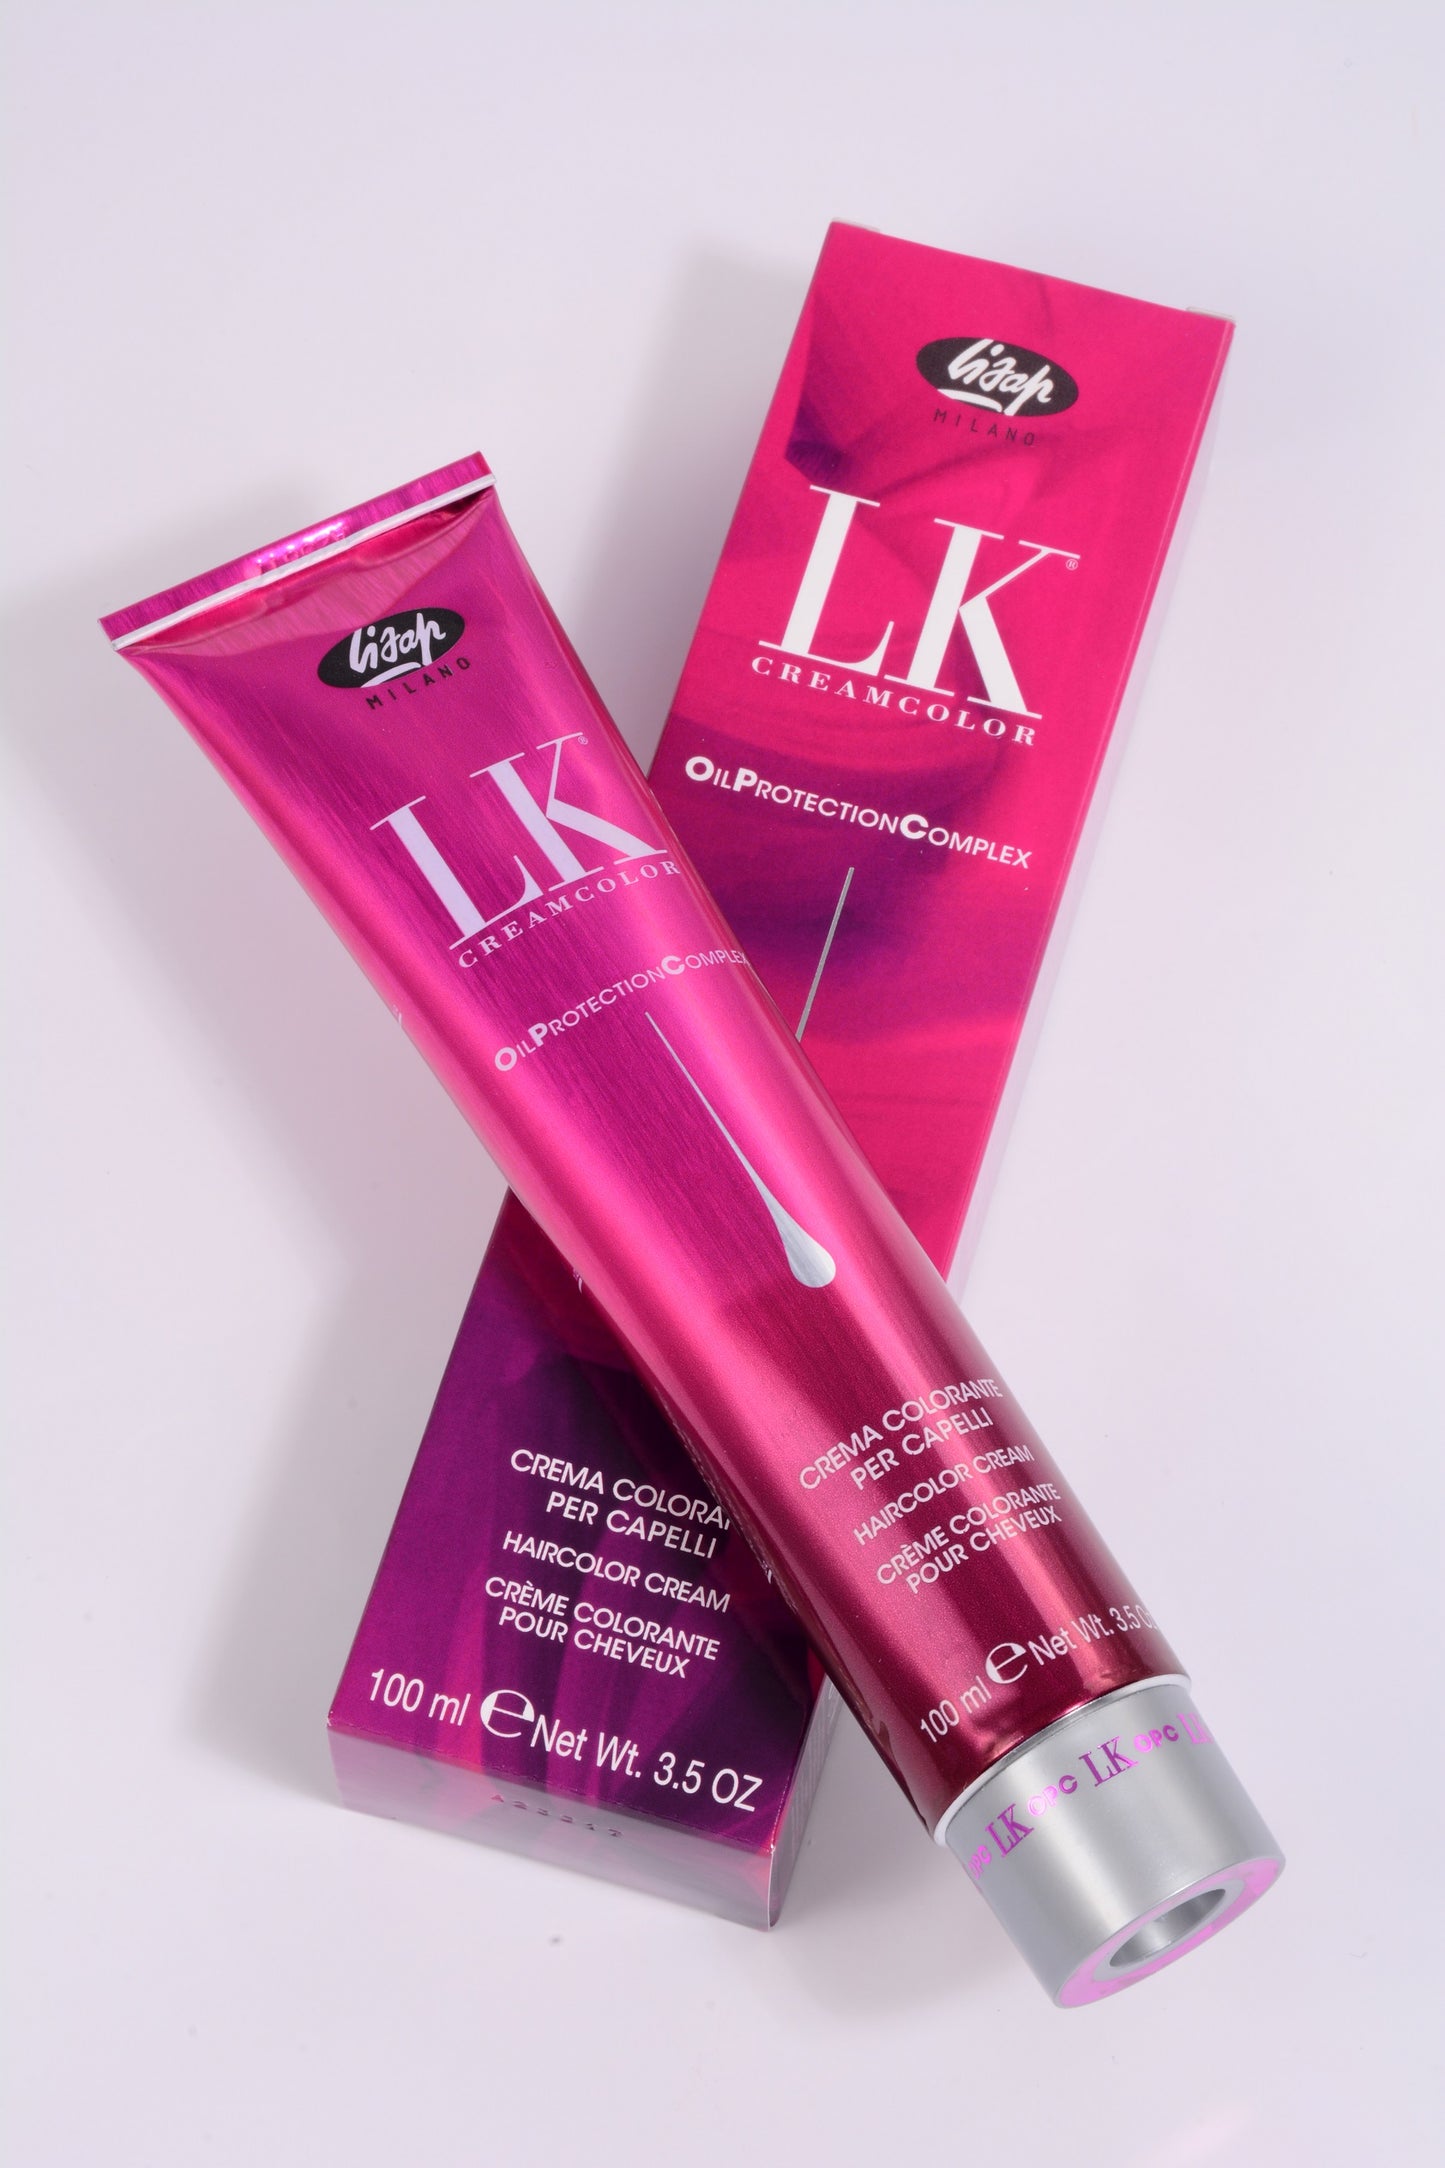 LK Creamcolor 4/2 Oil Protection Complex